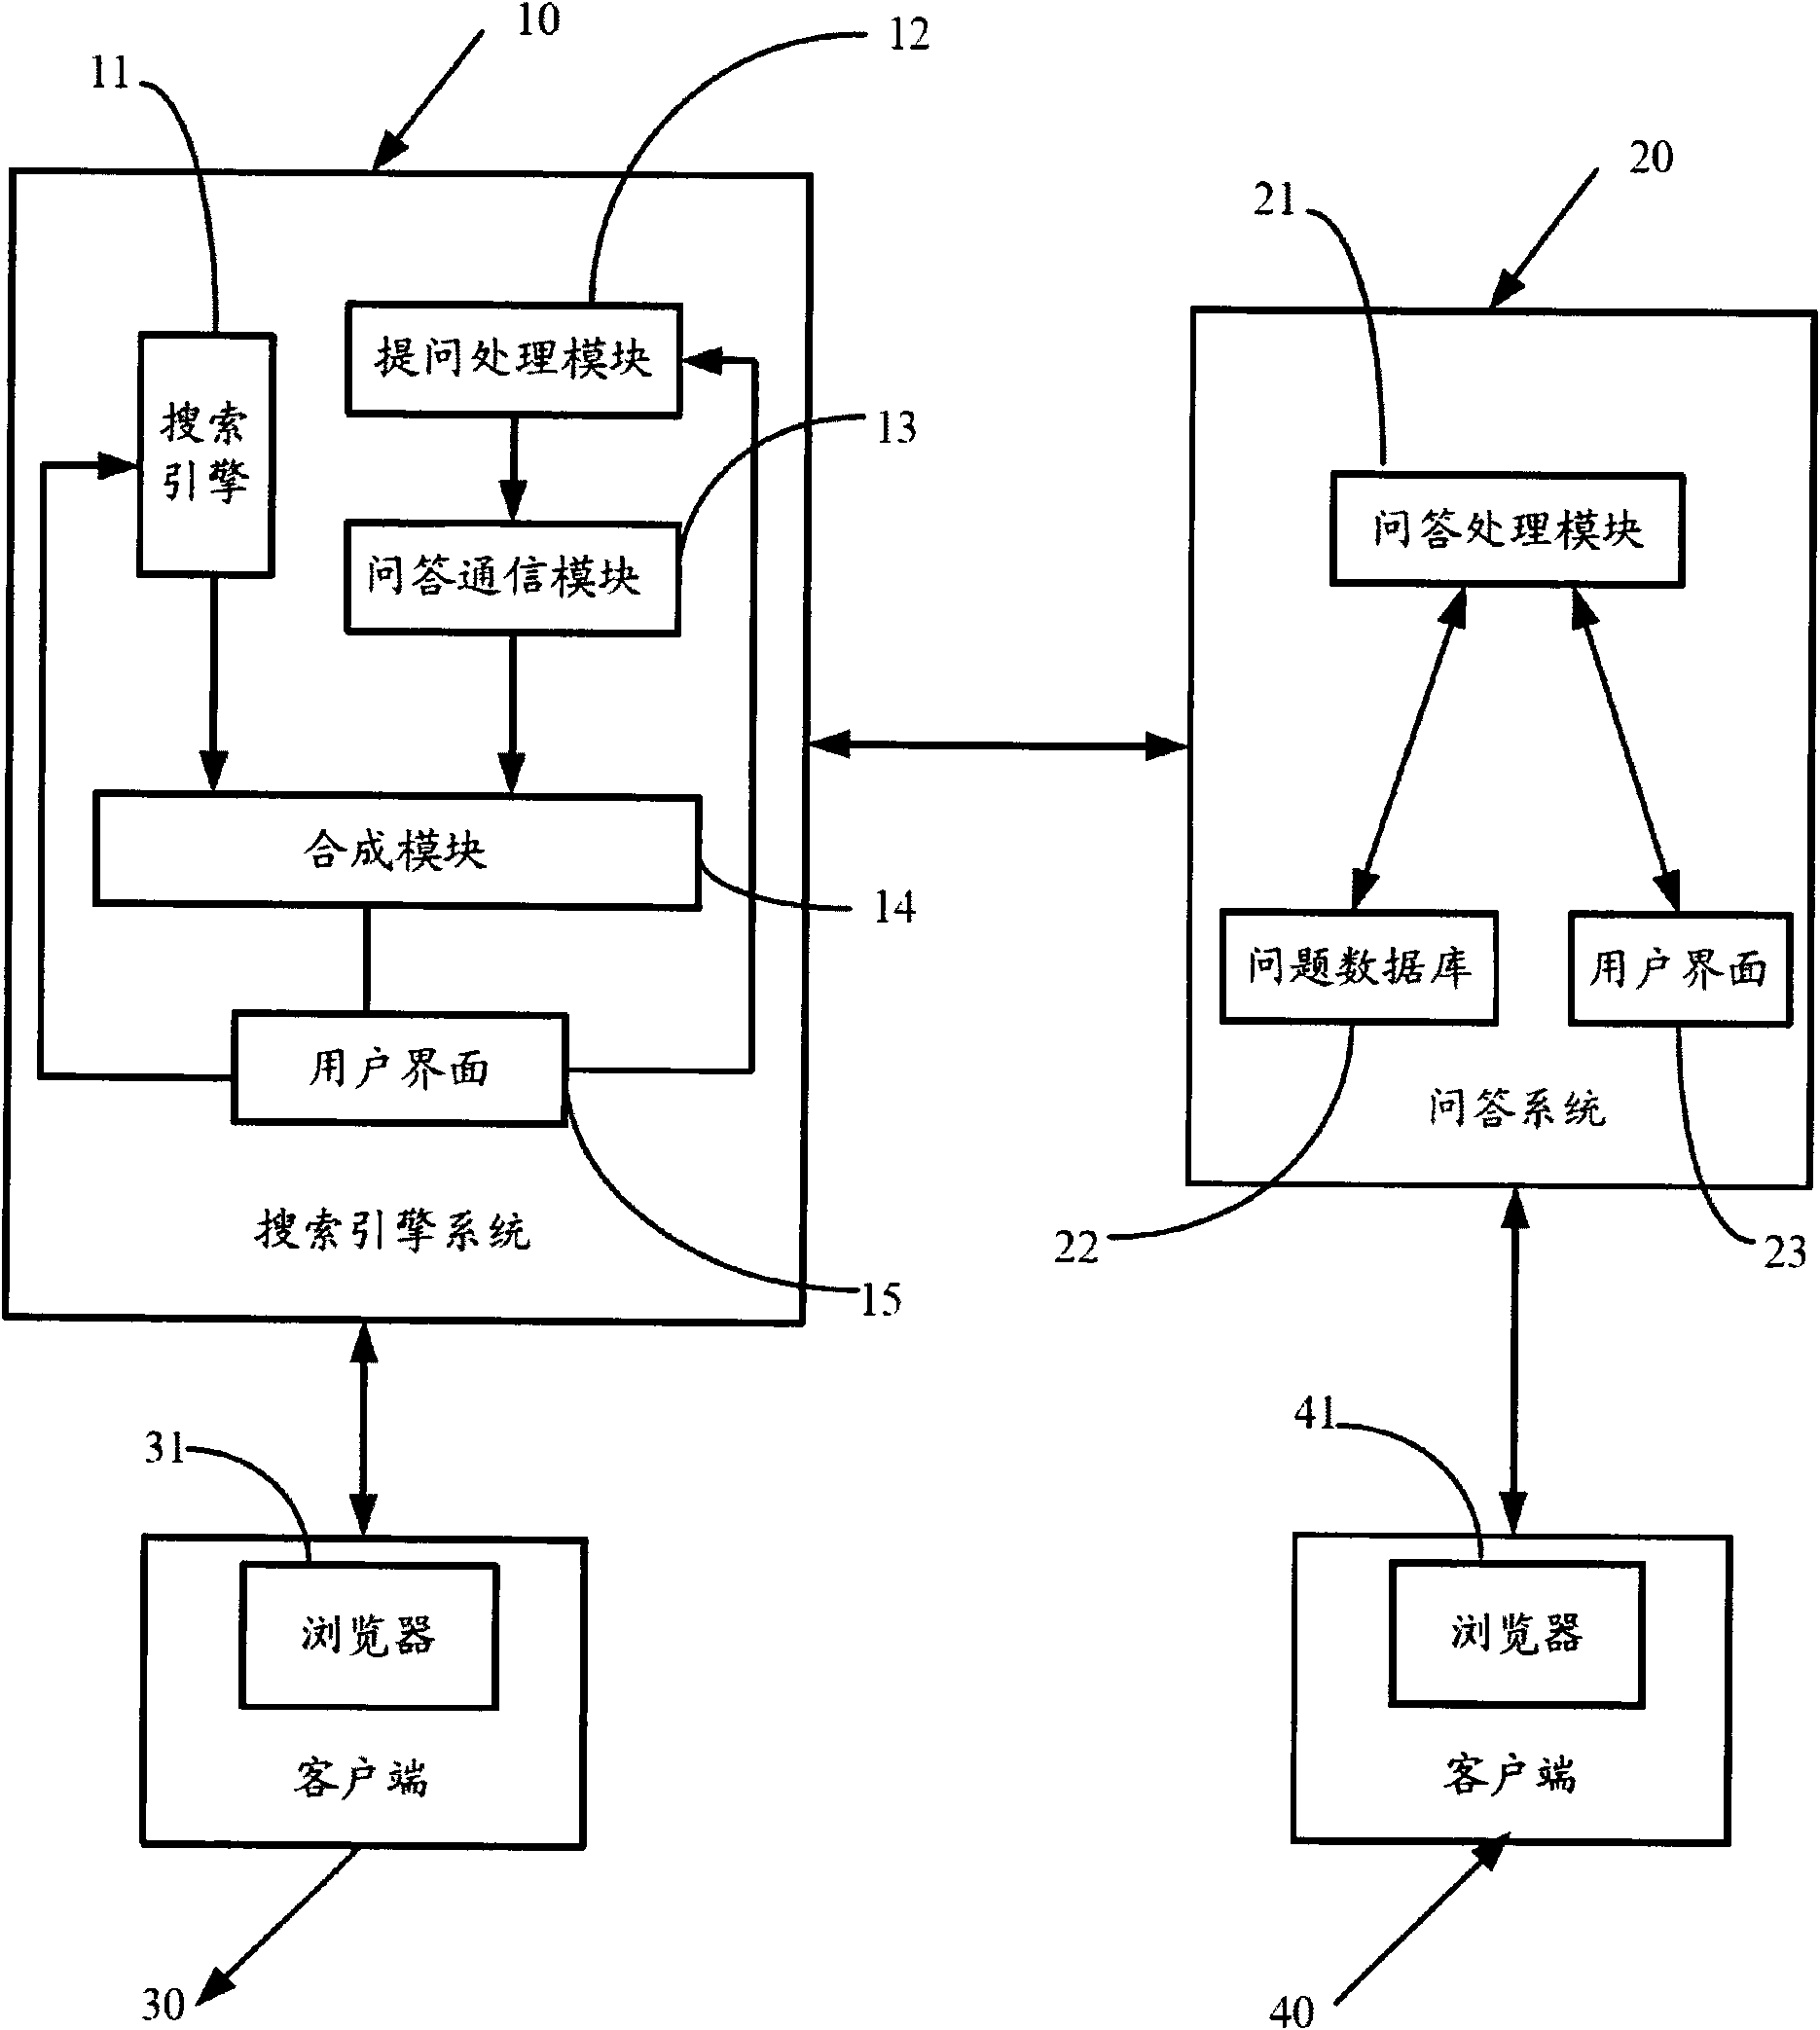 Search engine system and implementation method thereof